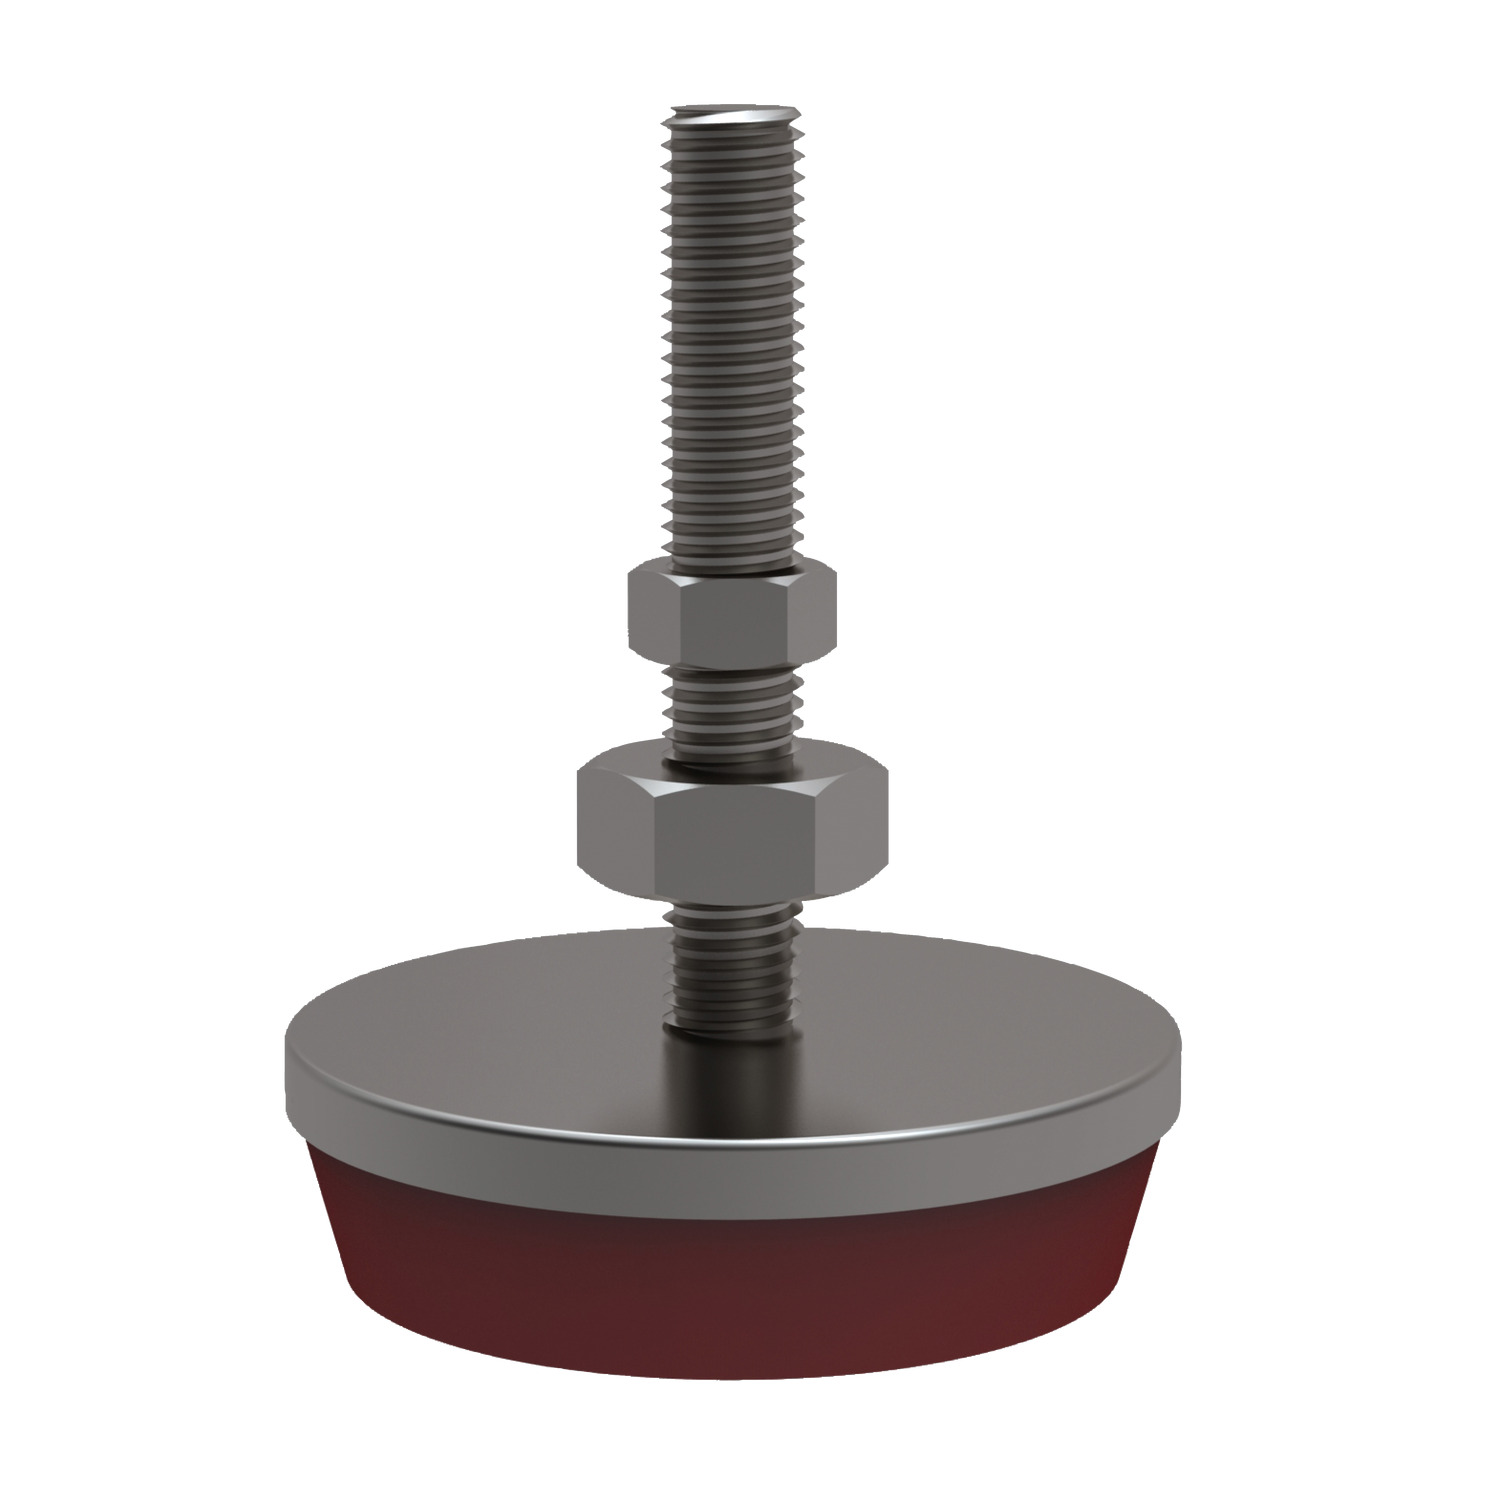 Stainless Machine Mounts Ideal for food and pharmaceutical applications with a hard polyurethane base that is resistant to aggressive oils & chemicals. Has a very heavy load carrying capacity